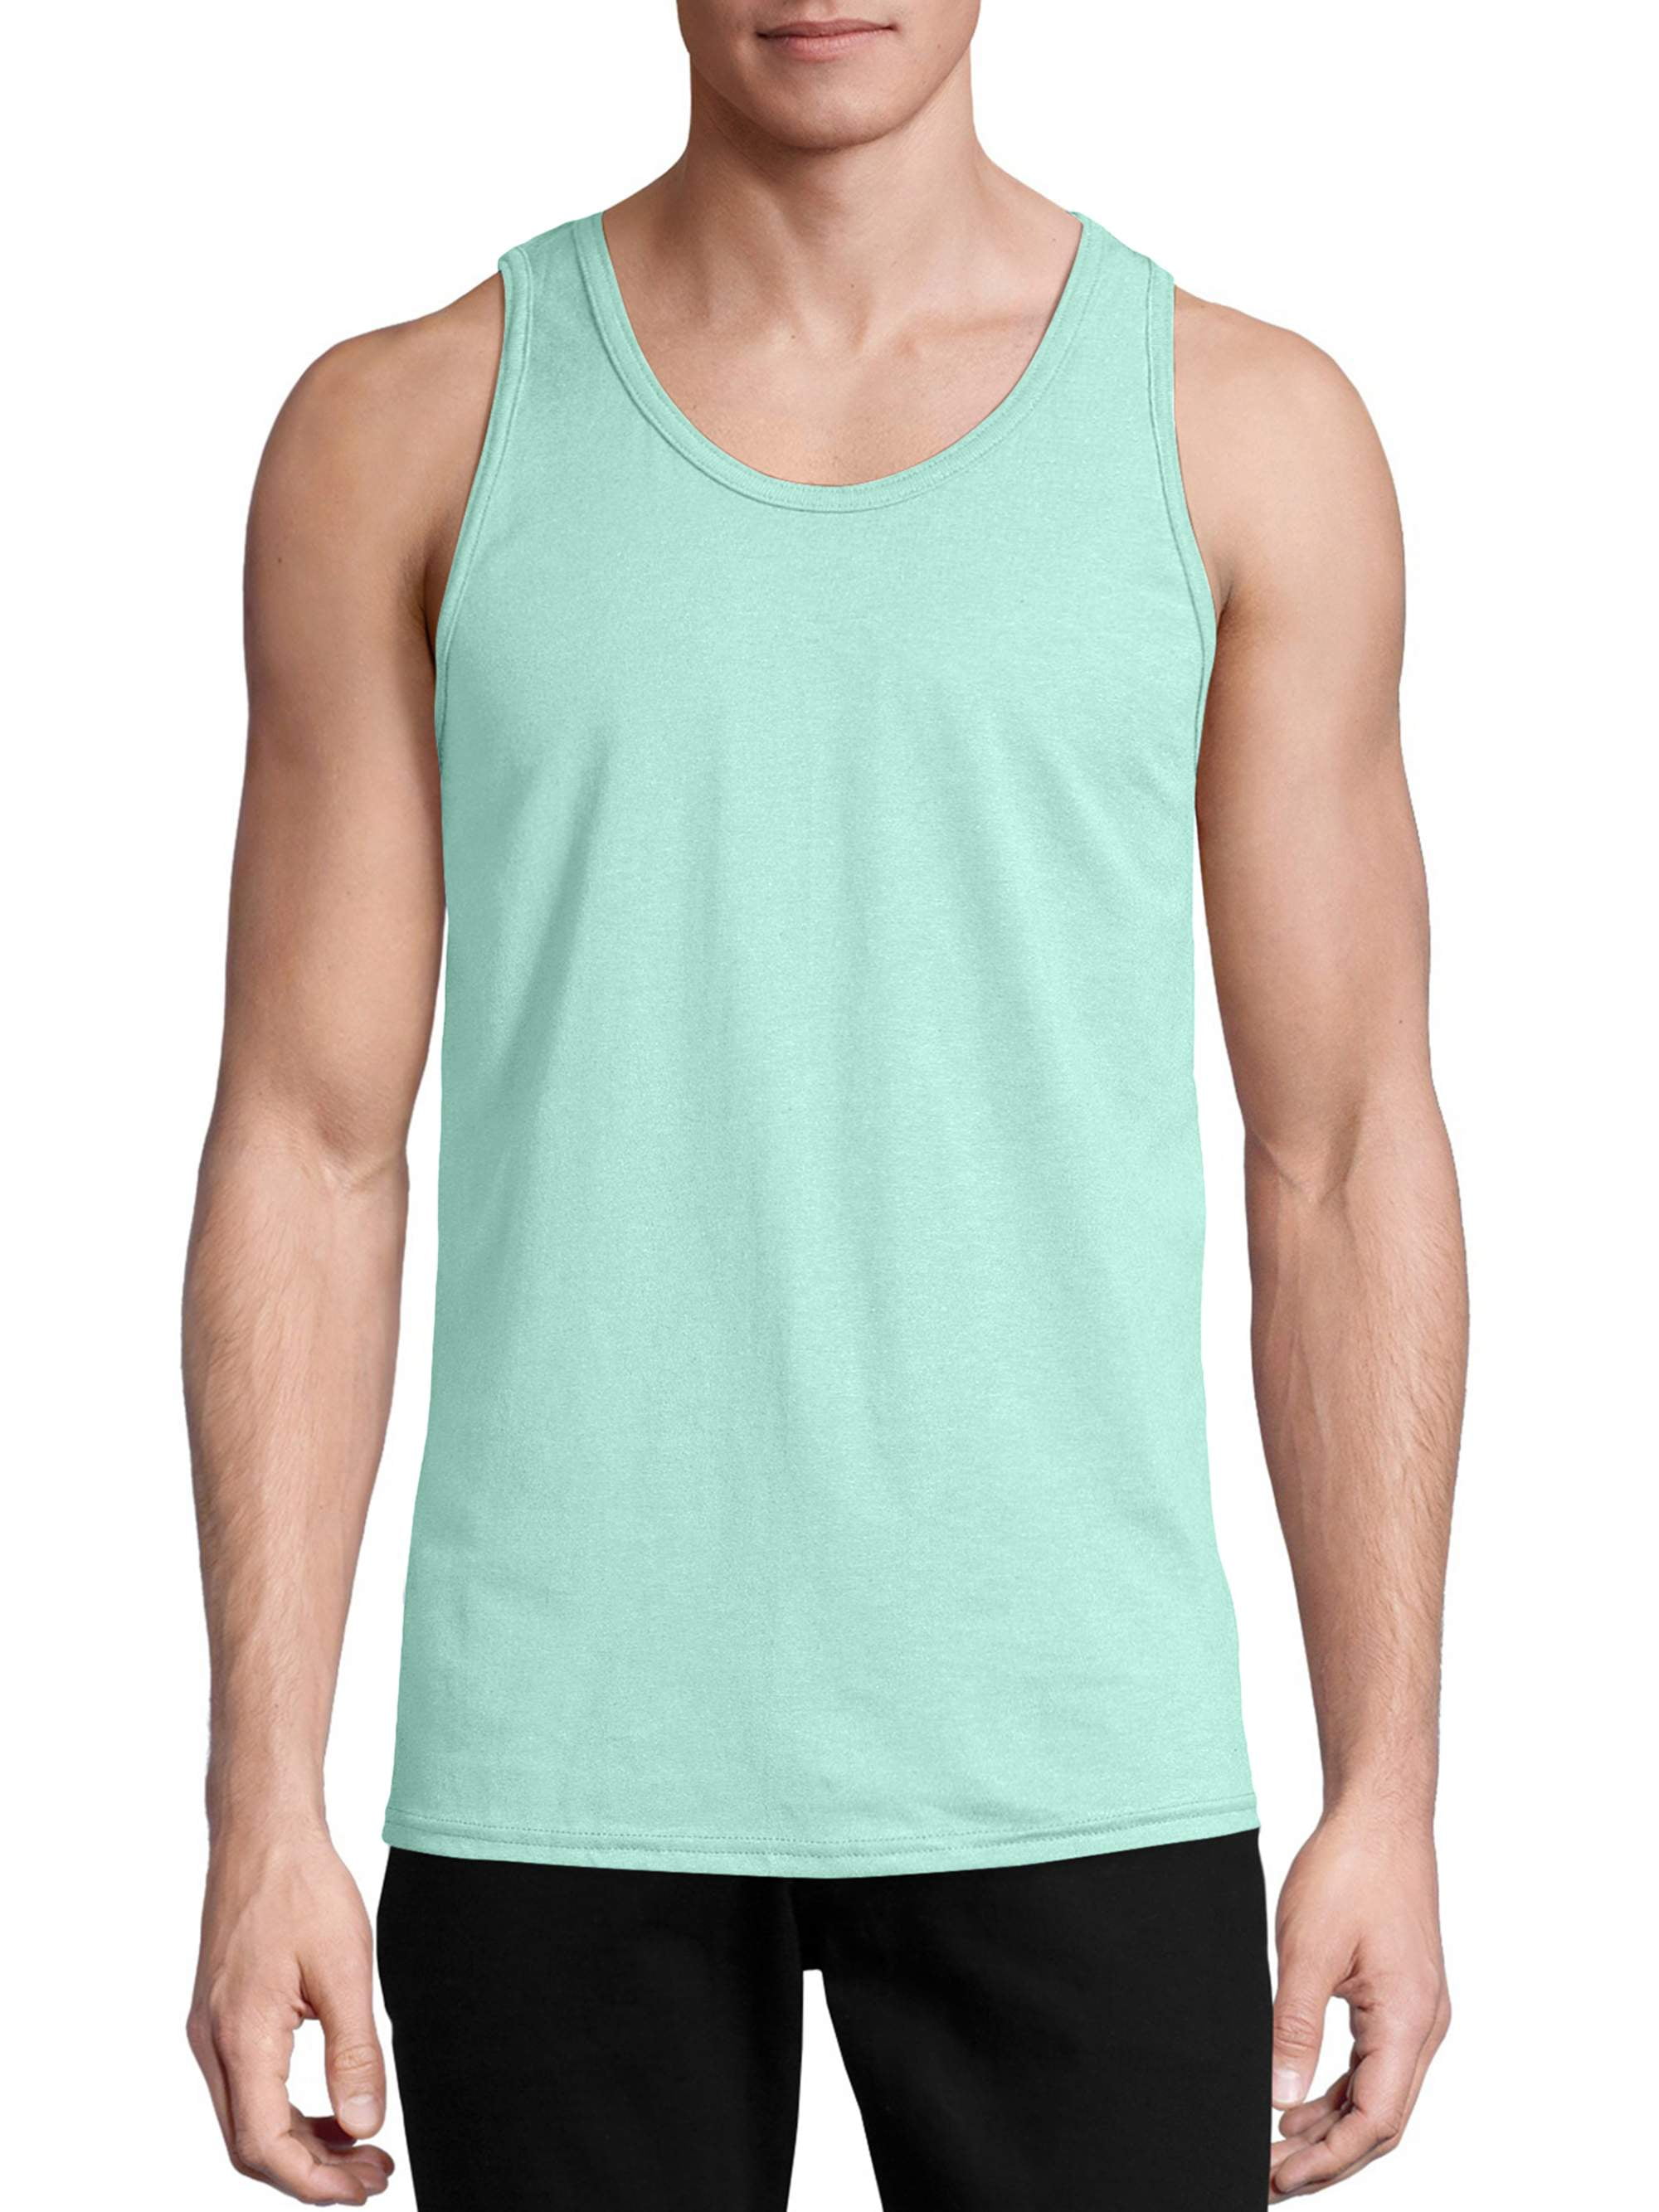 8 men's tank tops and A-shirts: Hanes, J.Crew, and more - Reviewed